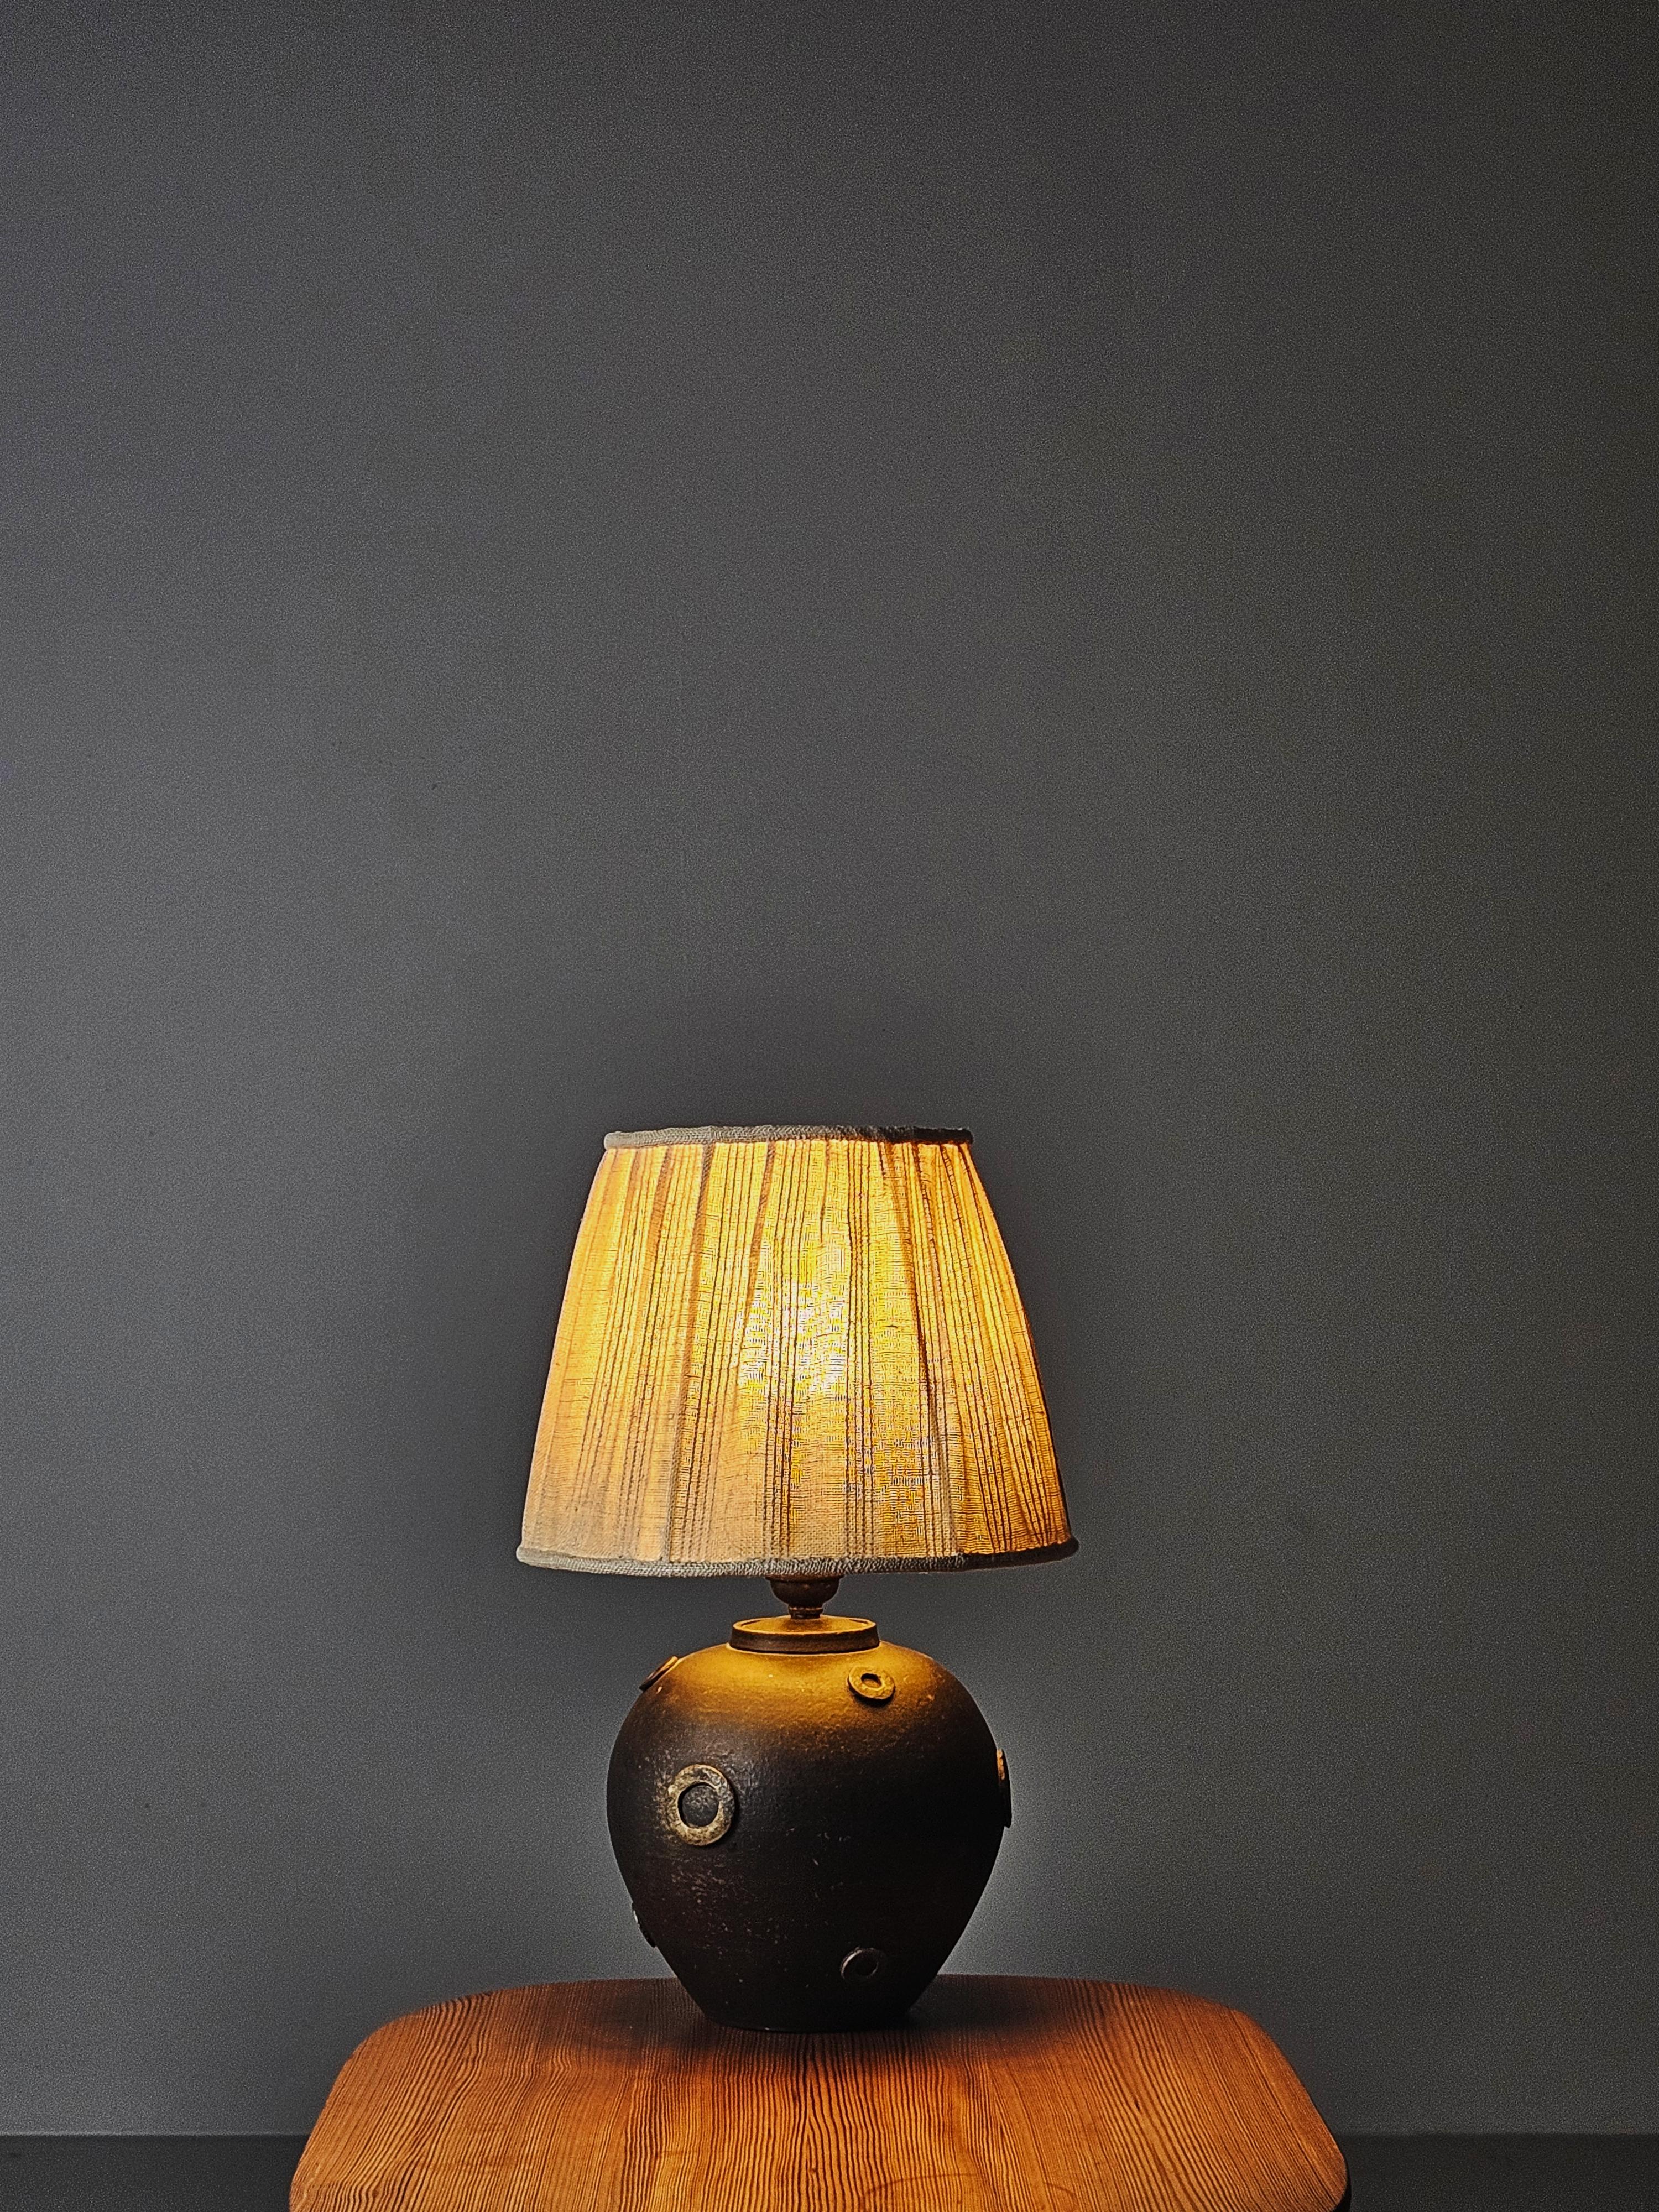 Ceramic Scandinavian modern table lamp, anonymous, 1930s For Sale